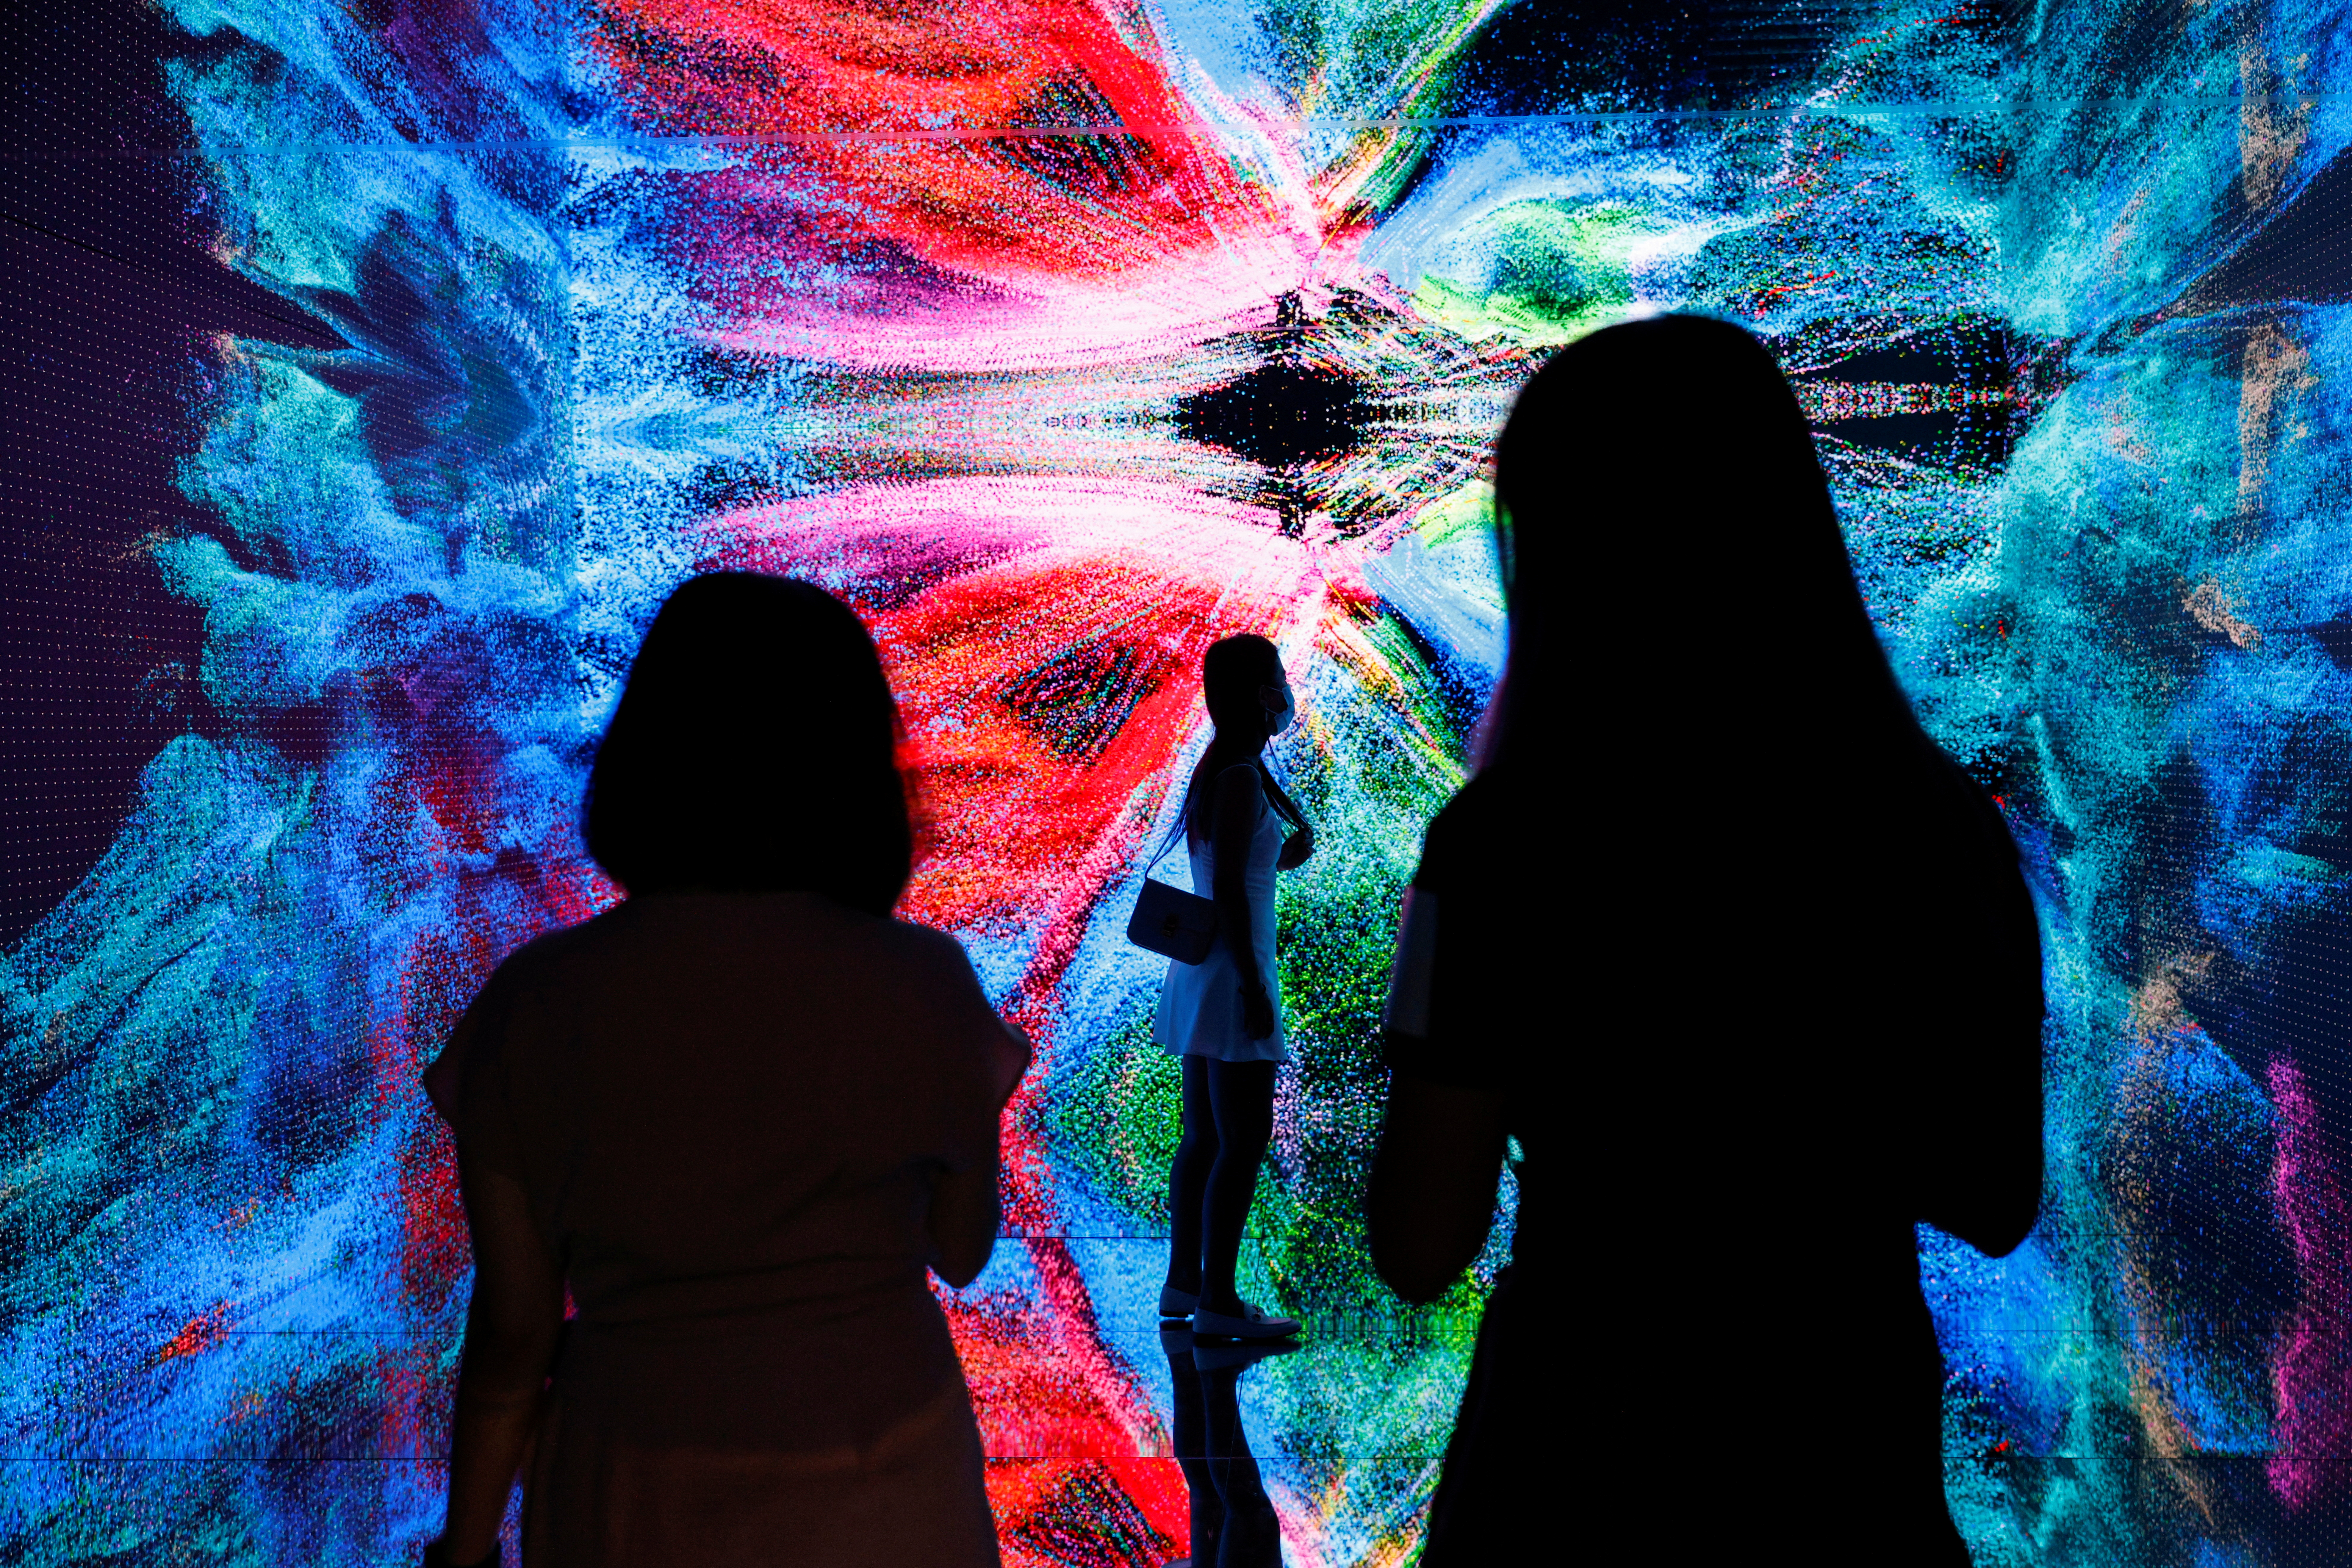 Visitors are pictured in front of an art installation which will be converted into NFT and auctioned online at Sotheby’s, in Hong Kong